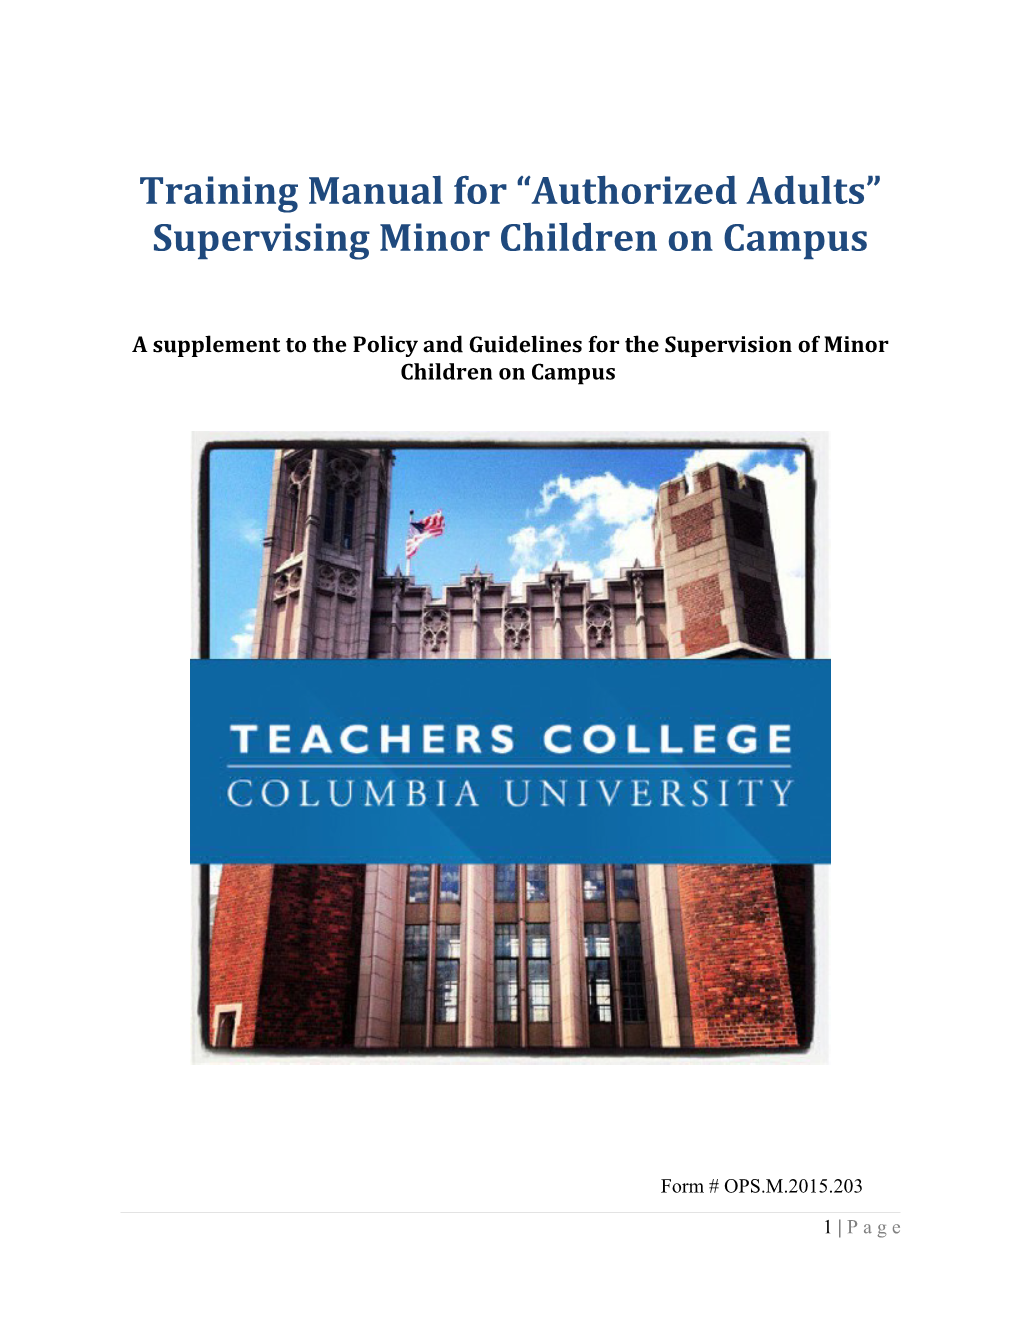 Training Manual for Authorized Adults Supervising Minor Children on Campus